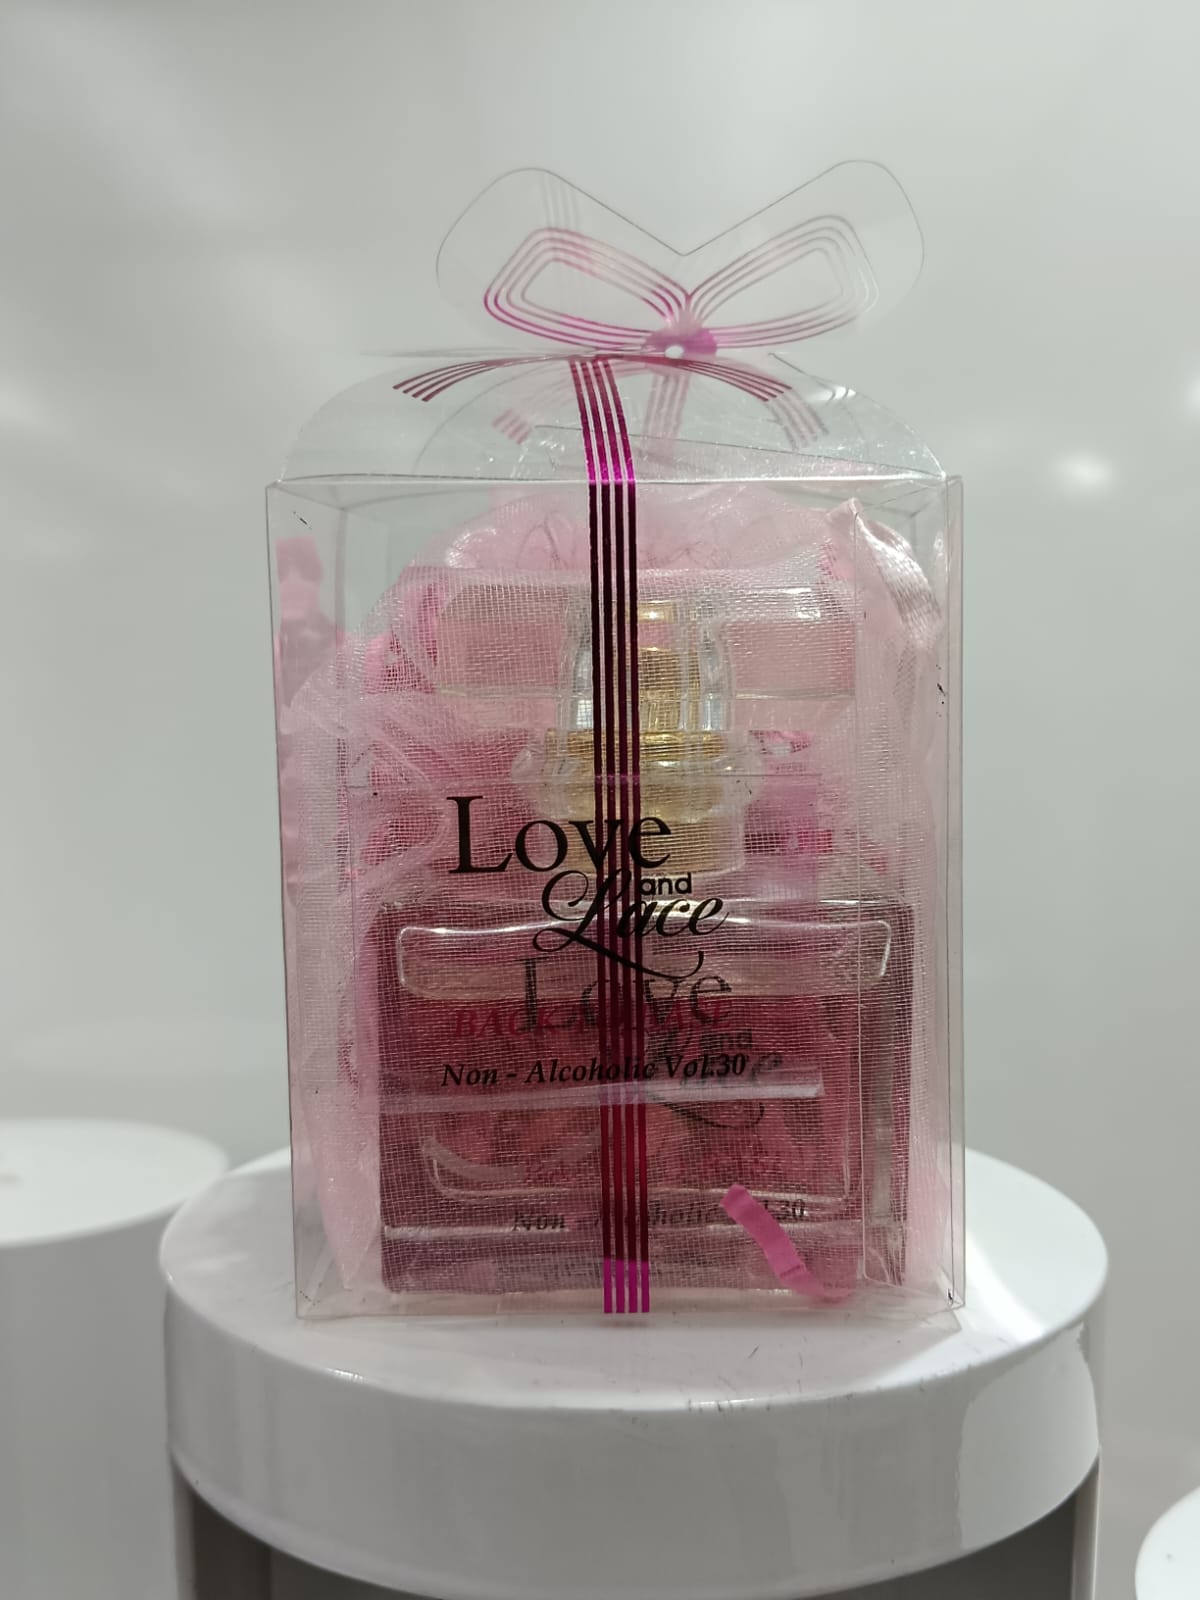 Love and Lace Back to Base Perfume 100ml Love and Lace